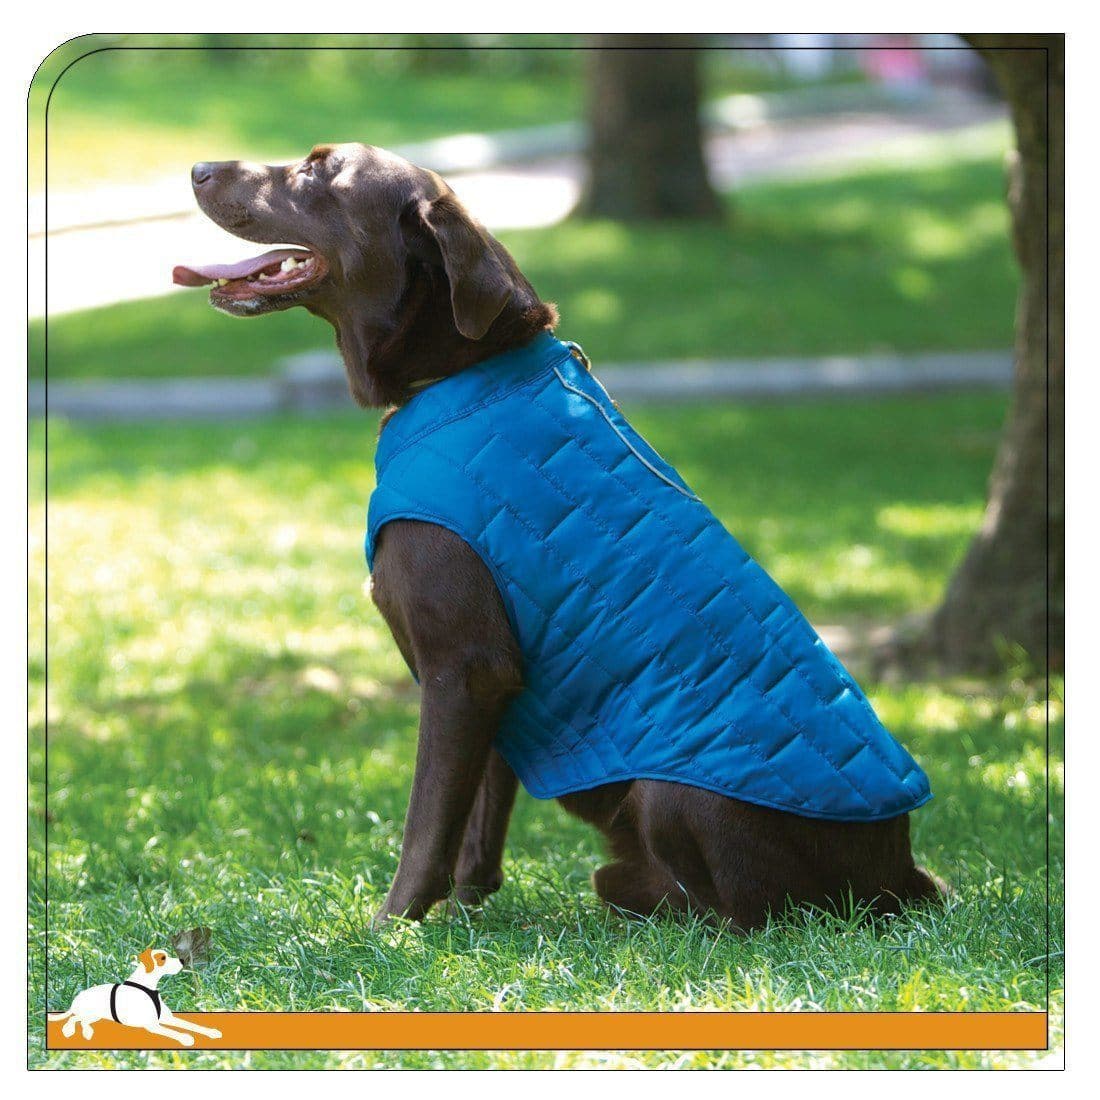 Chamarra Reversible Impermeable para Perro Floral / Magenta